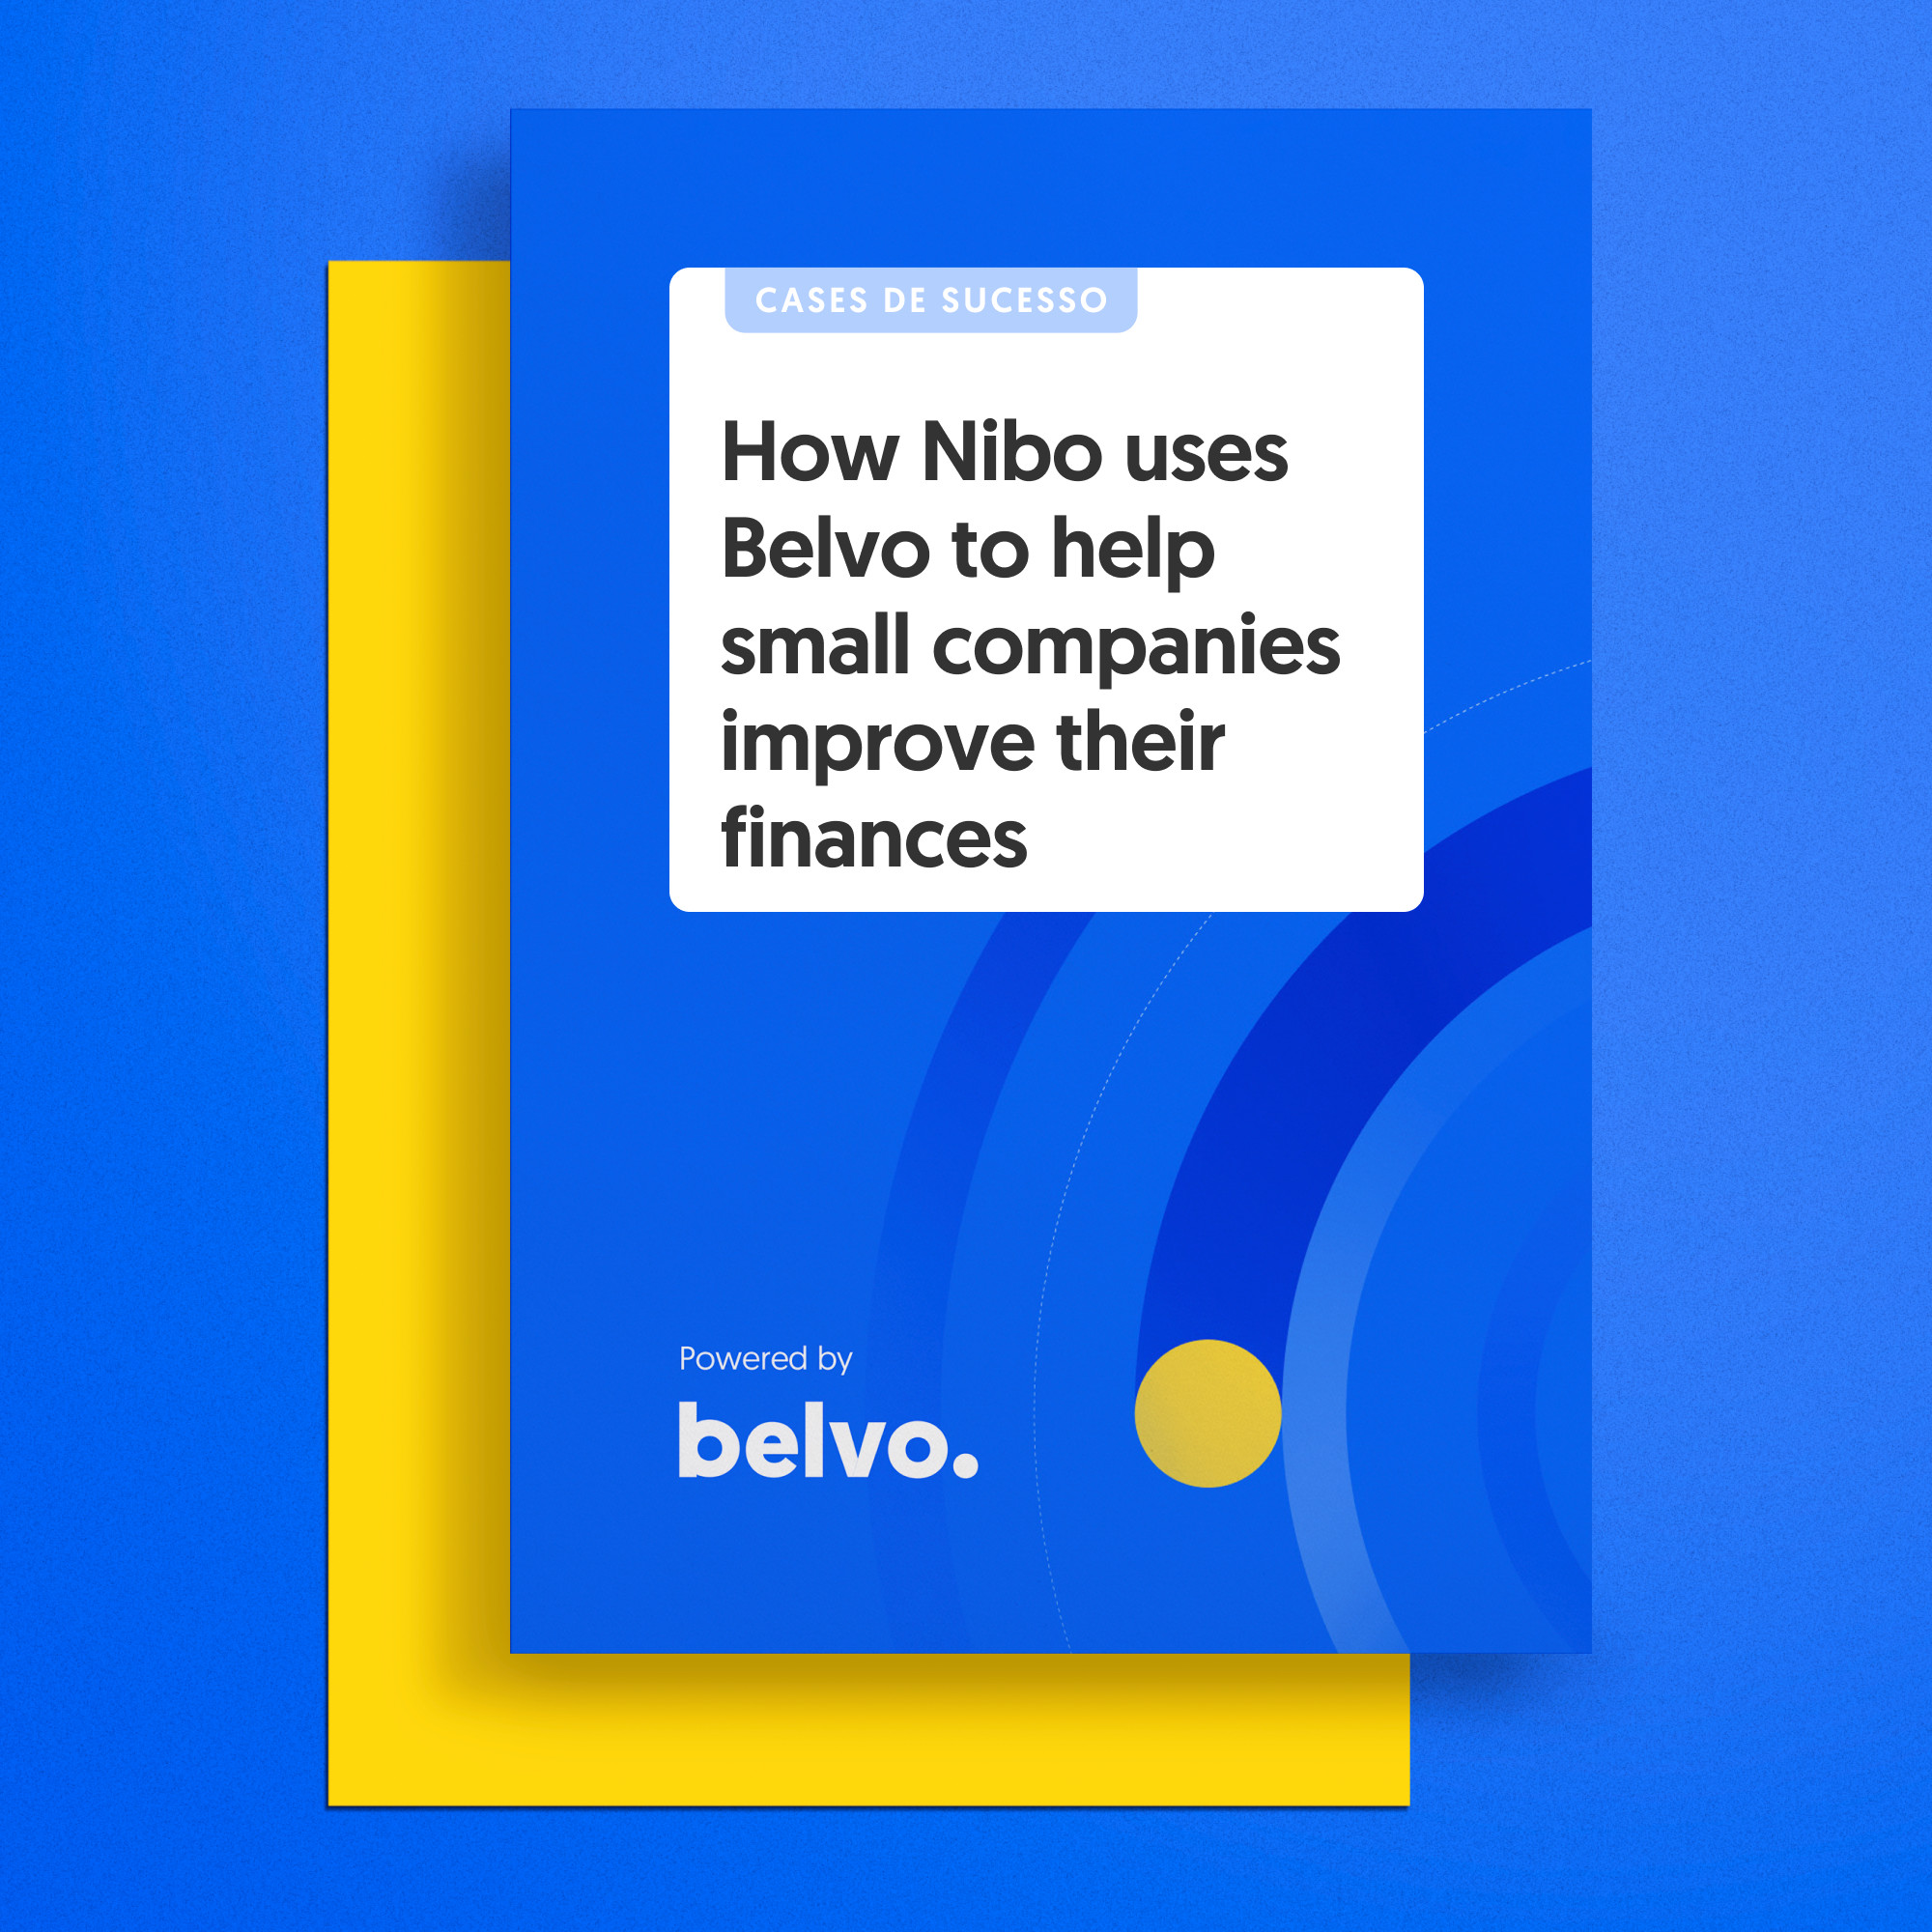 How Nibo uses Belvo to help small companies improve their finances